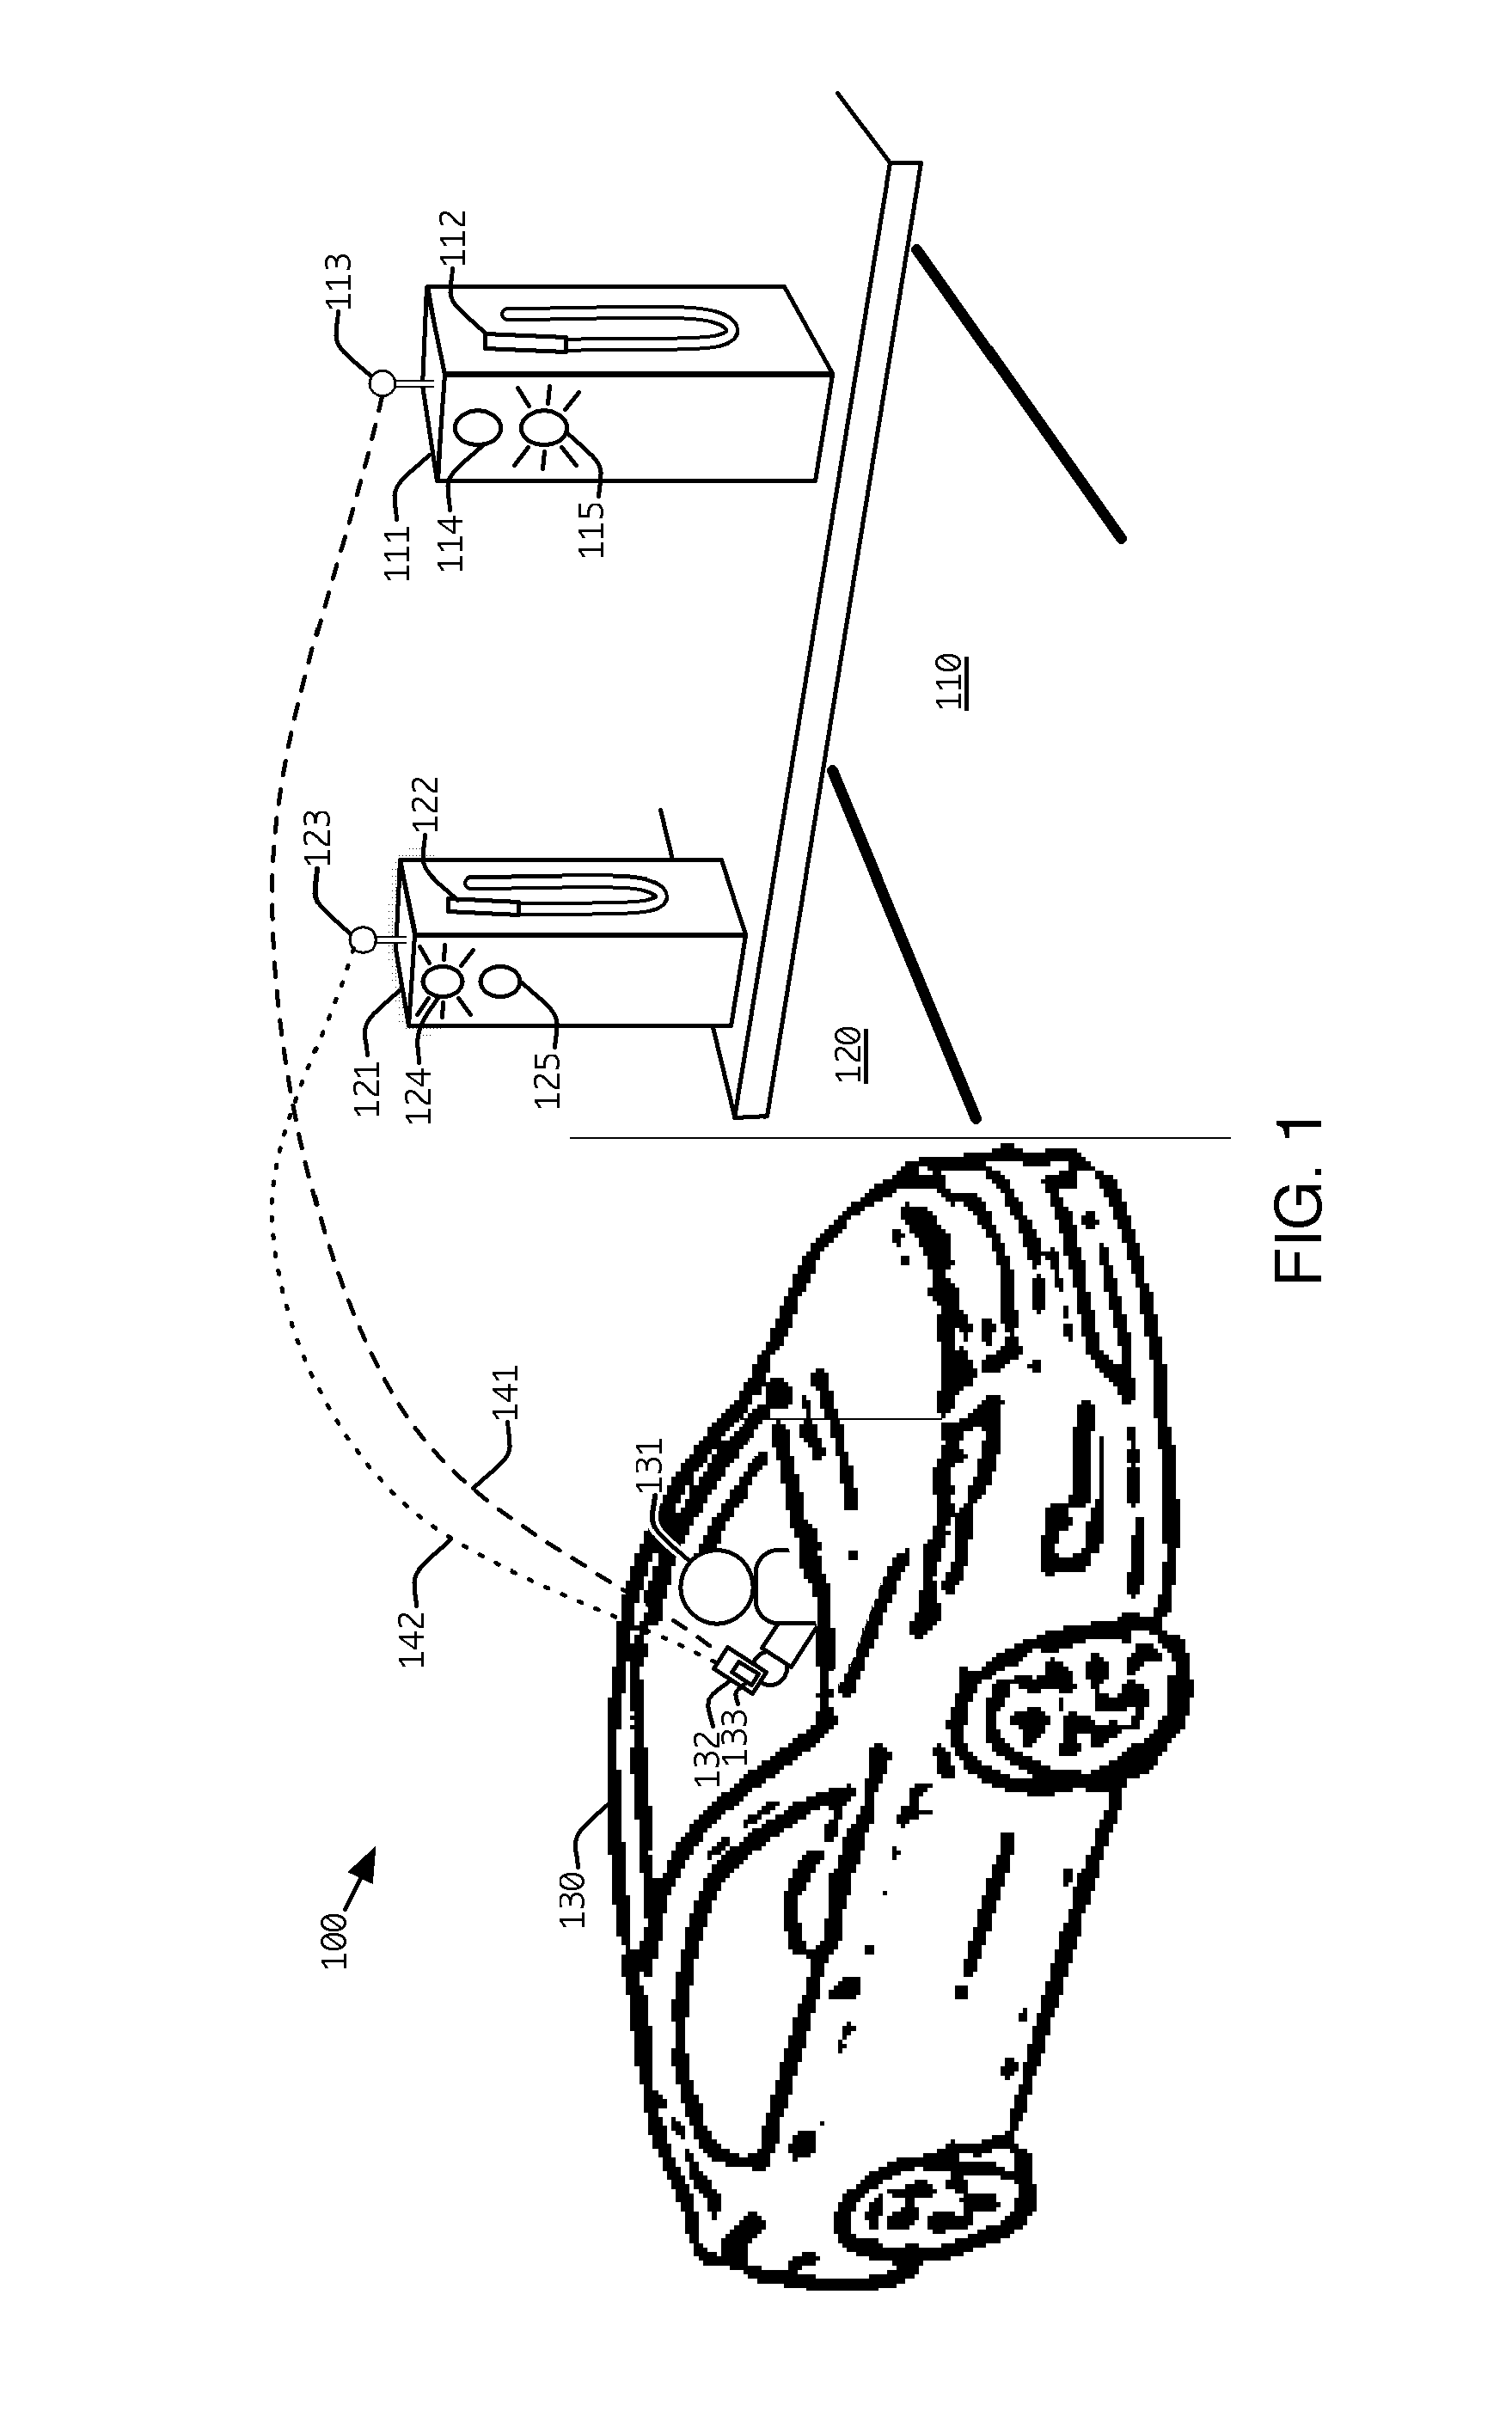 Method and apparatus for finding and accessing a vehicle fueling station and for reporting data from remote sensors